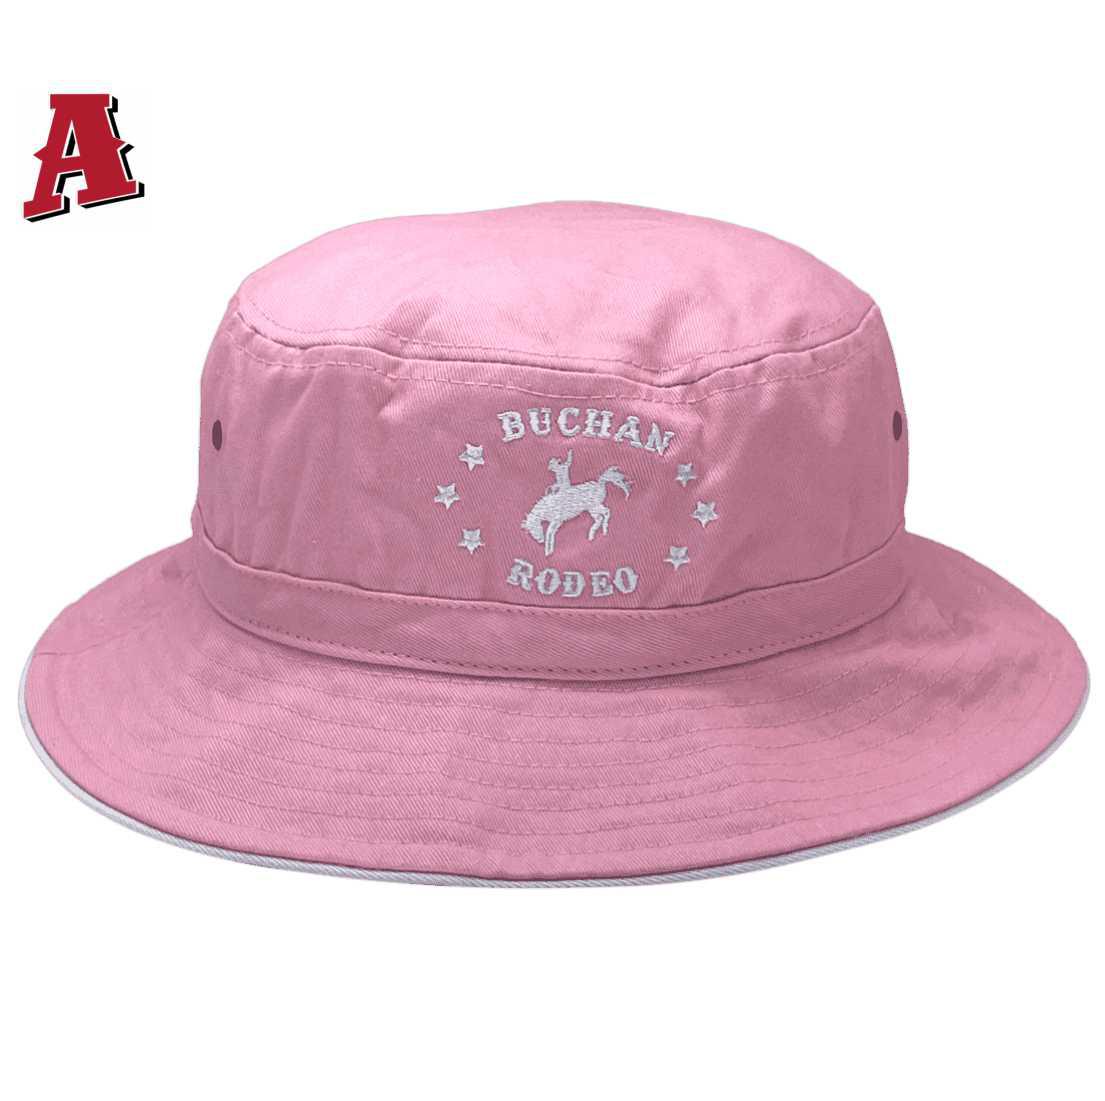 Buchan Rodeo Buchan South VIC Aussie Bucket Hat One Size Fits All with Adjustable Toggle Crown and Optional Size Brim 5cm-7.5cm